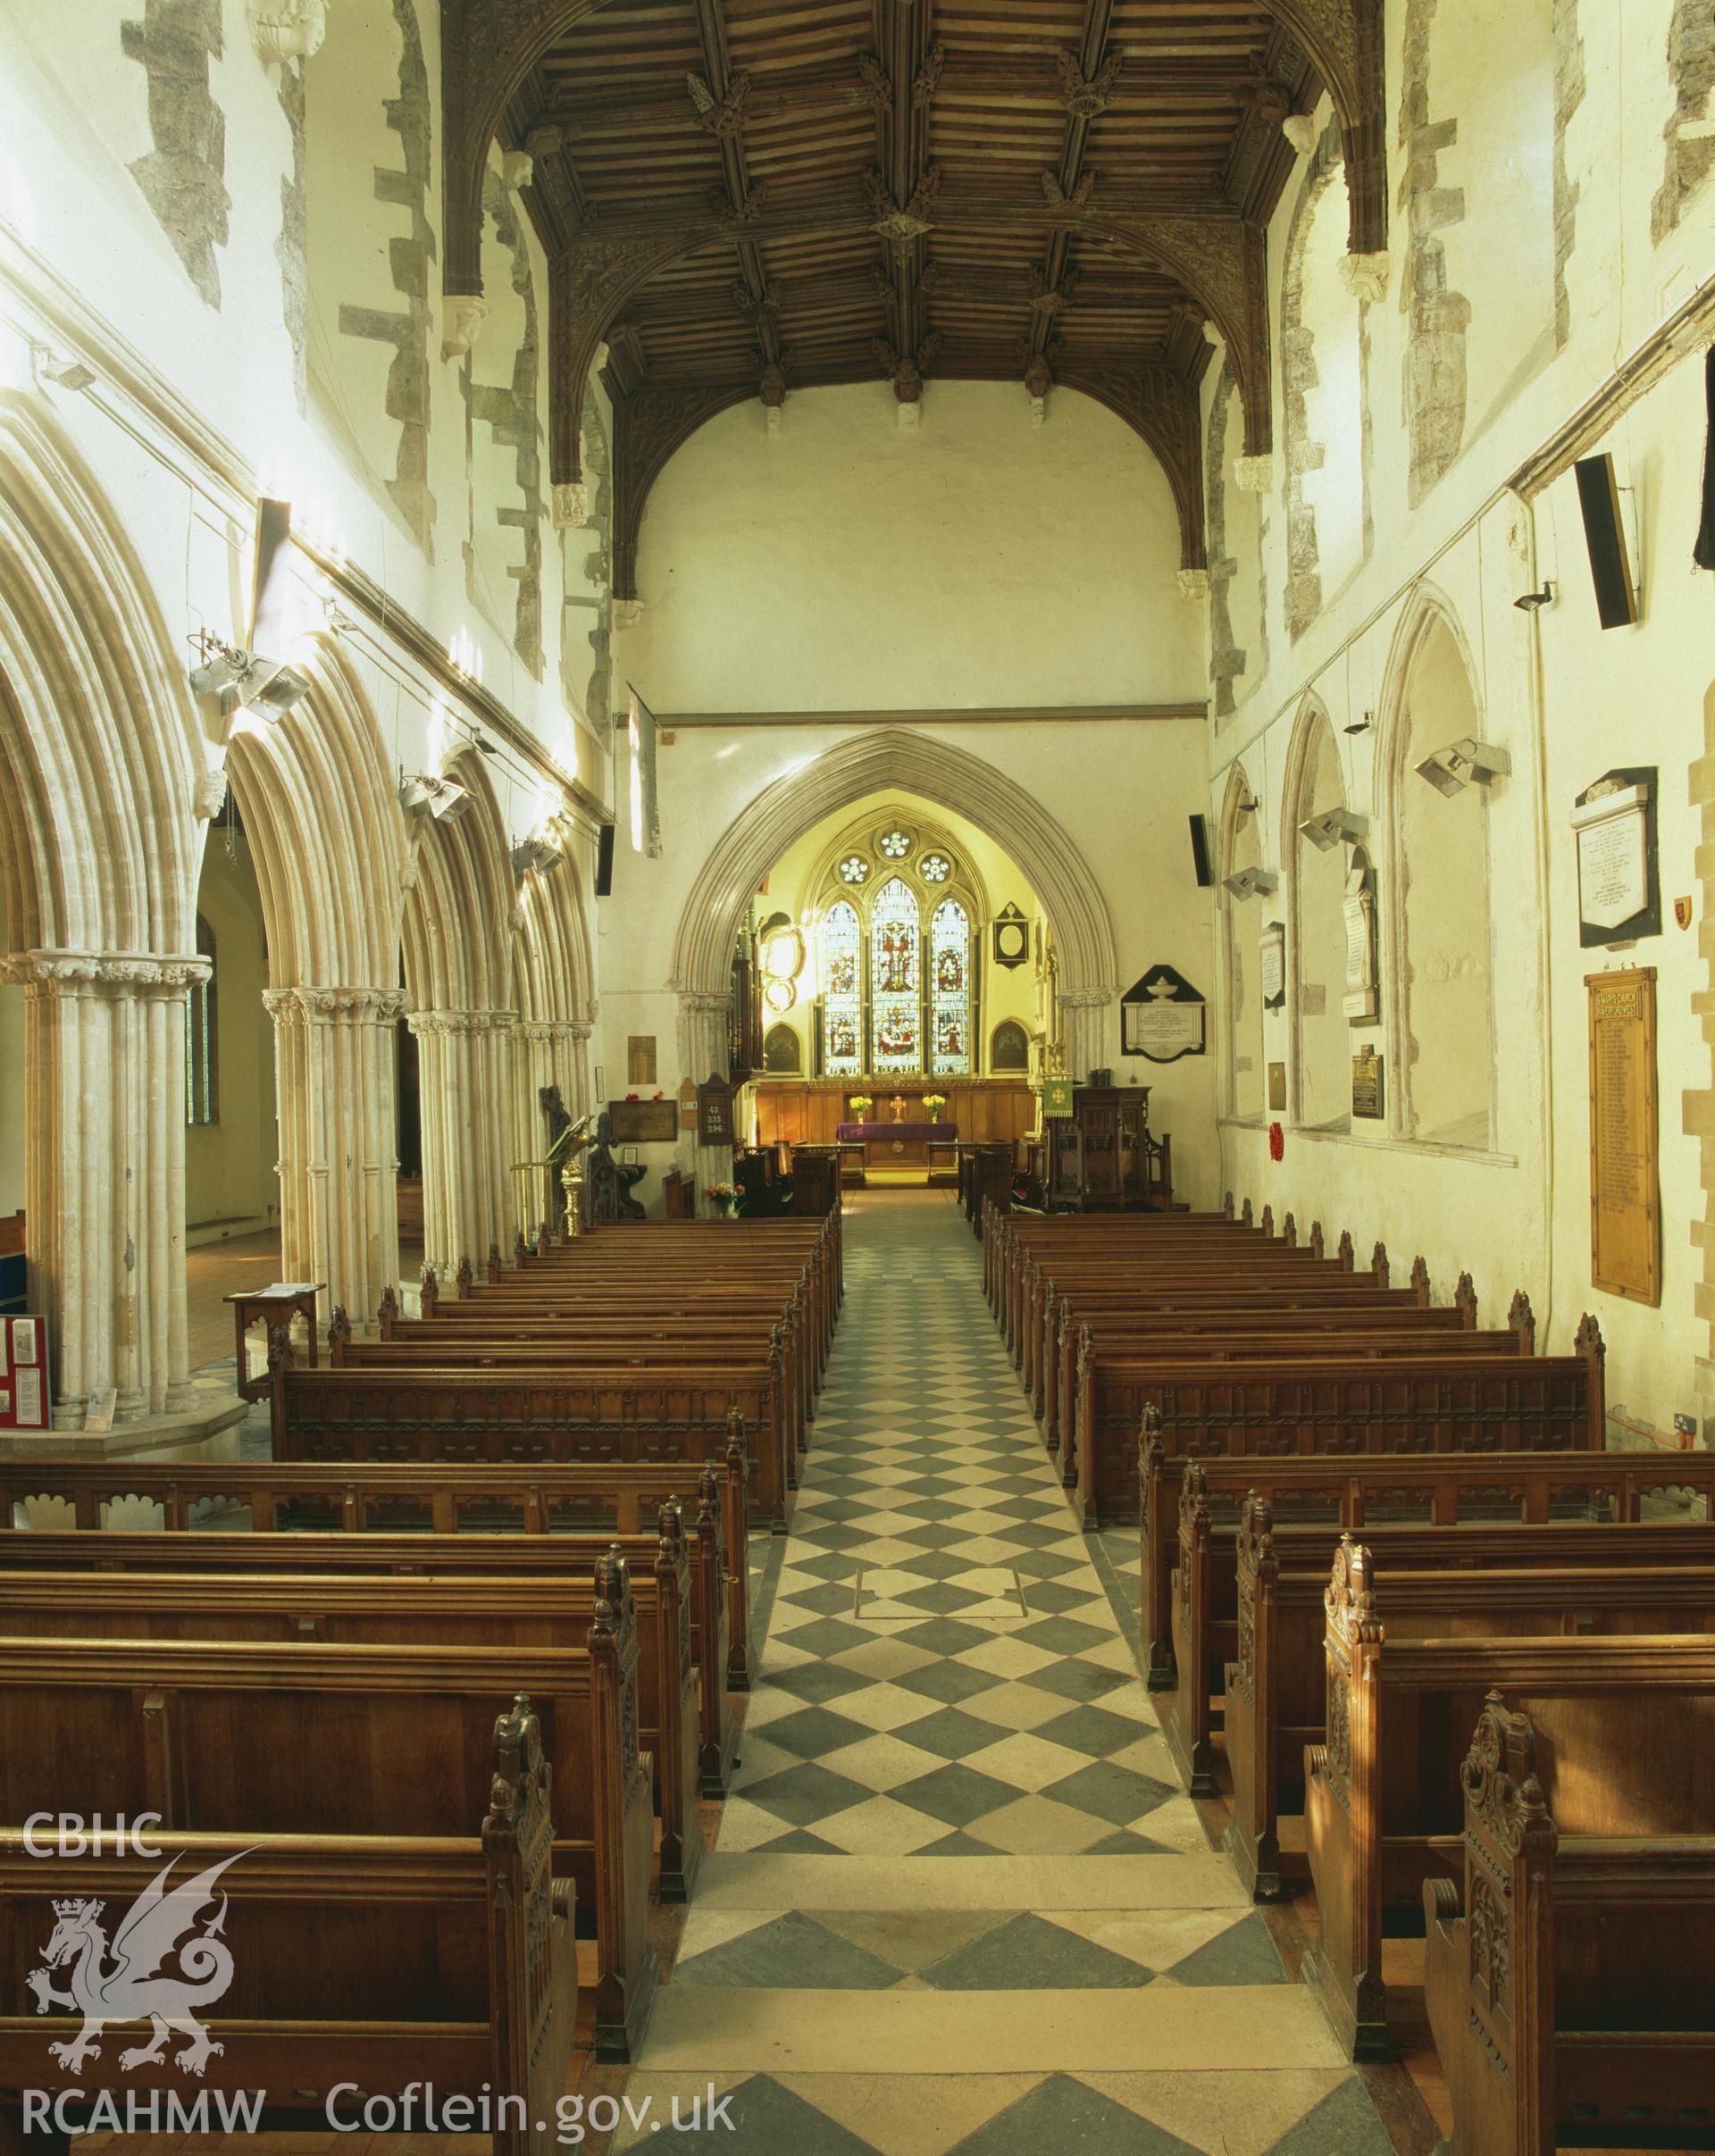 RCAHMW colour transparency showing interior view of St Marys Church, Haverfordwest, taken by Iain Wright, 2003.